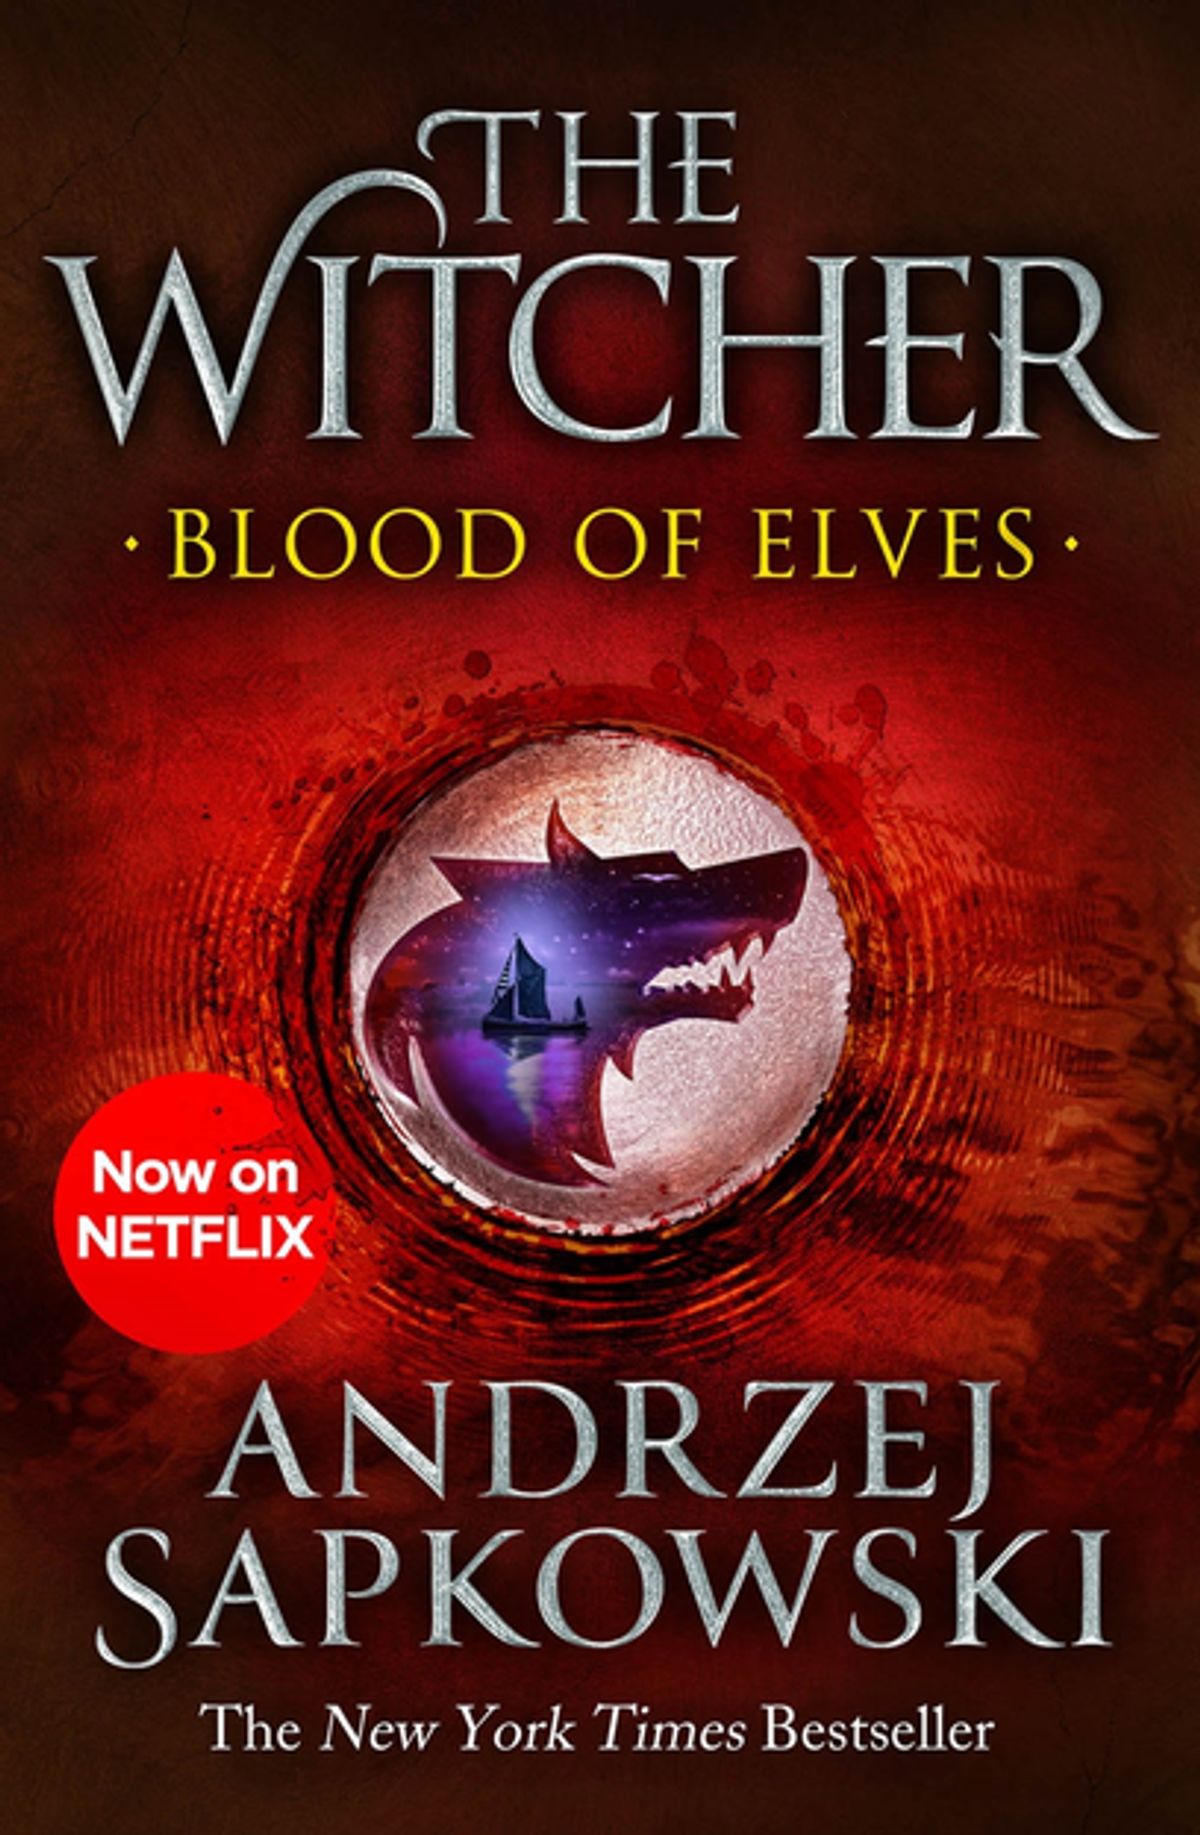 Blood of Elves cover - The Witcher by Andrzej Sapkowski